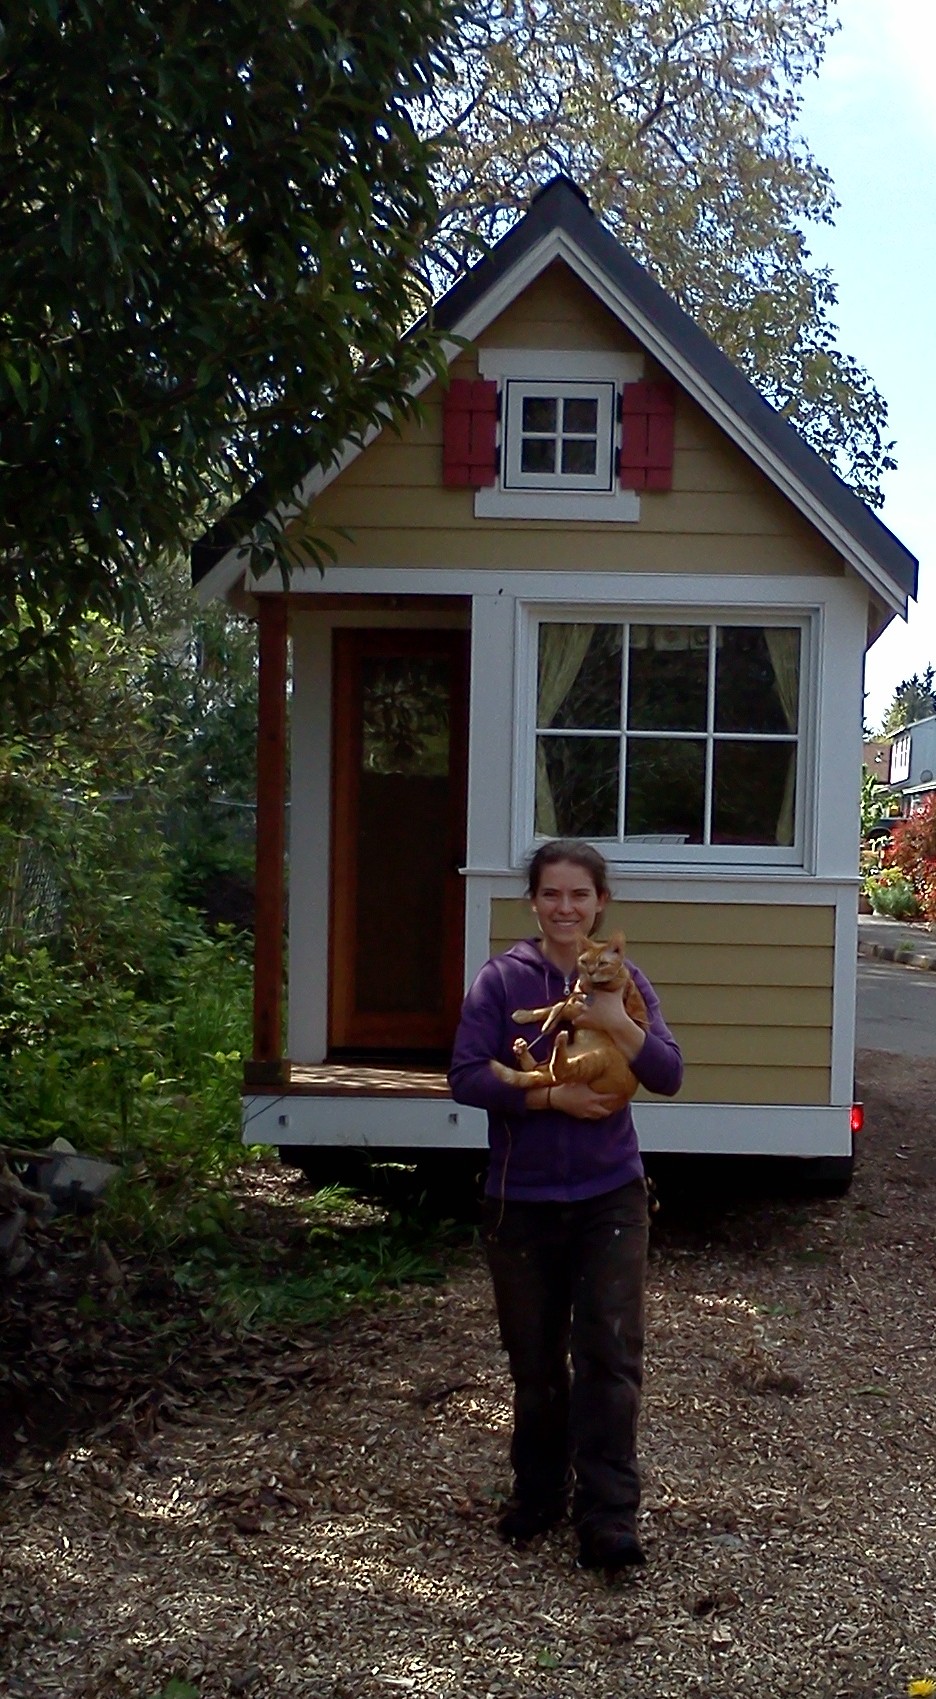 tiny house on the road again!